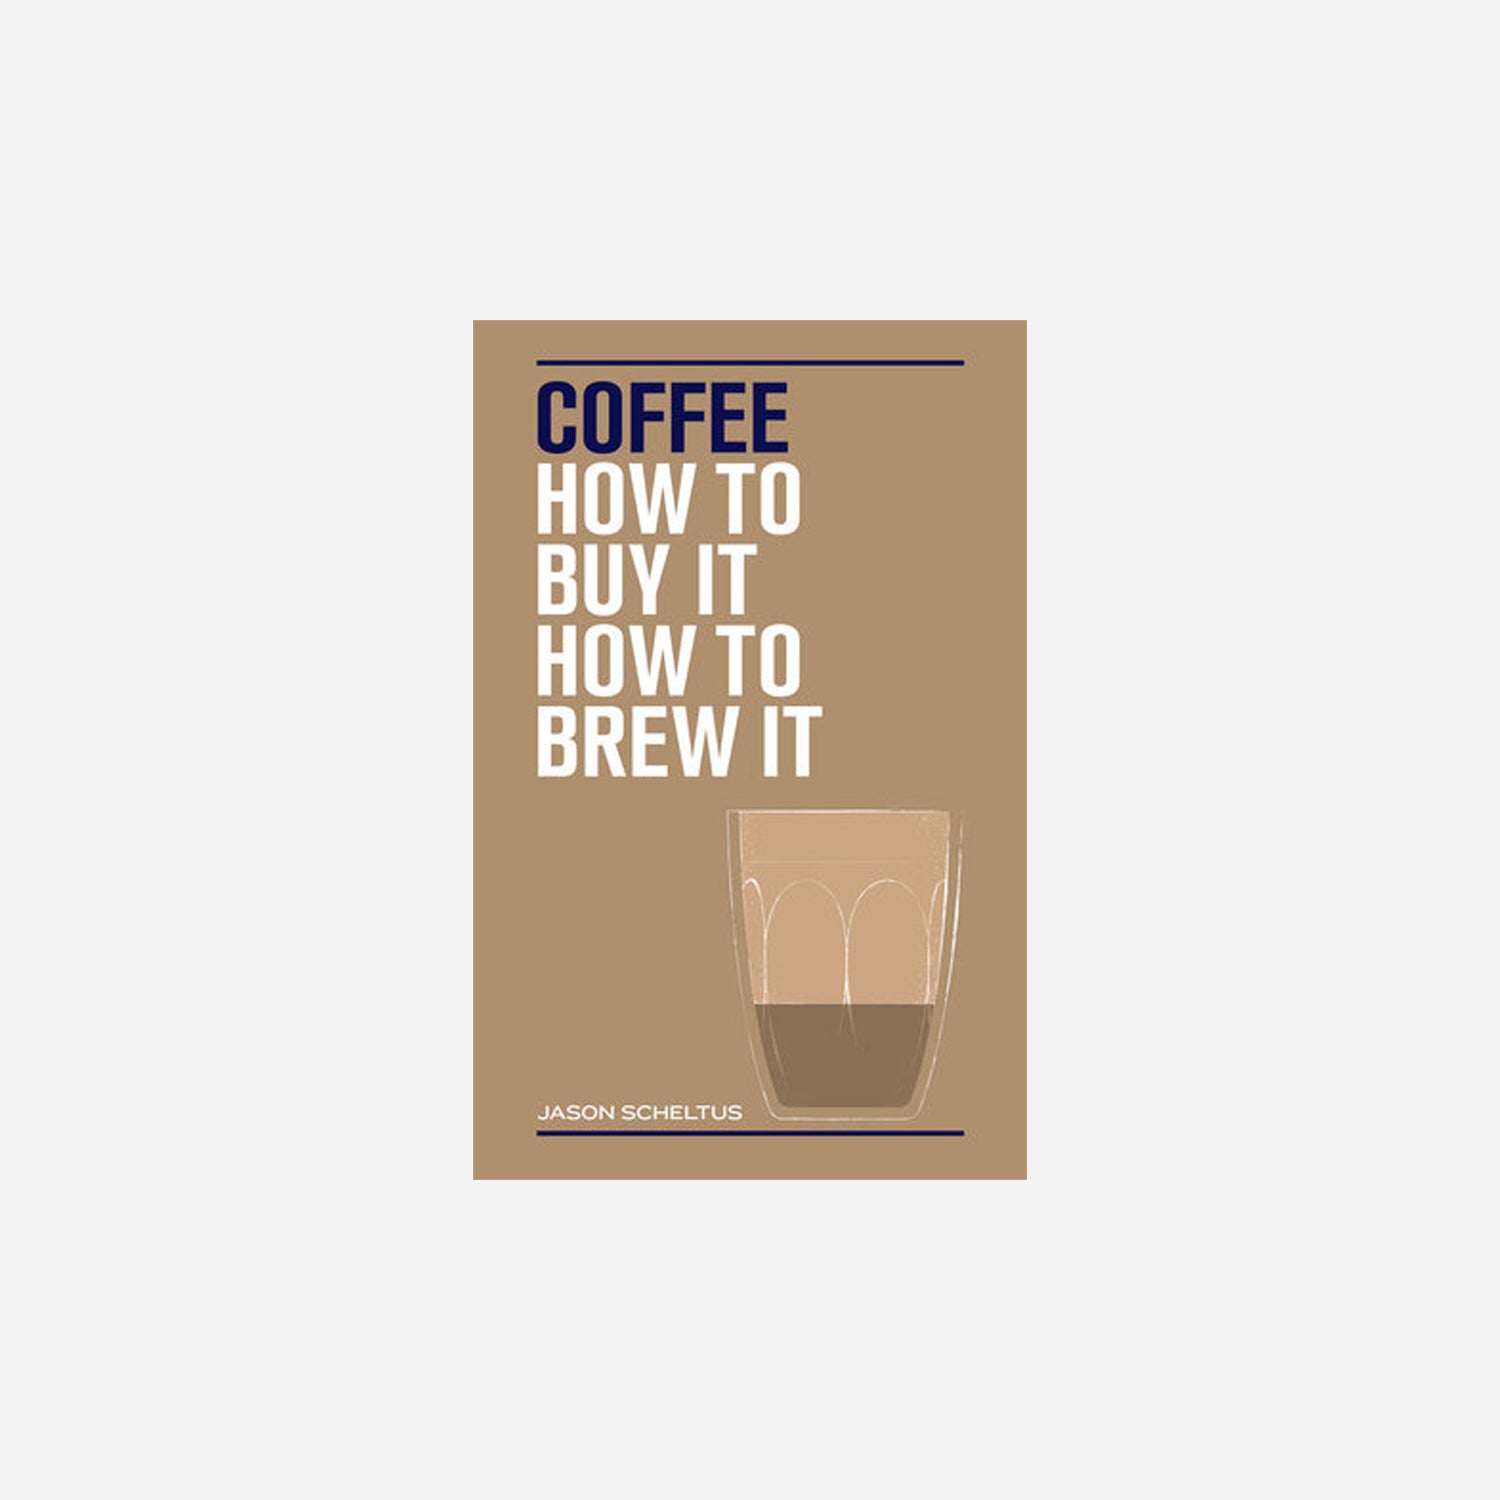 Coffee: How to buy it, how to brew it